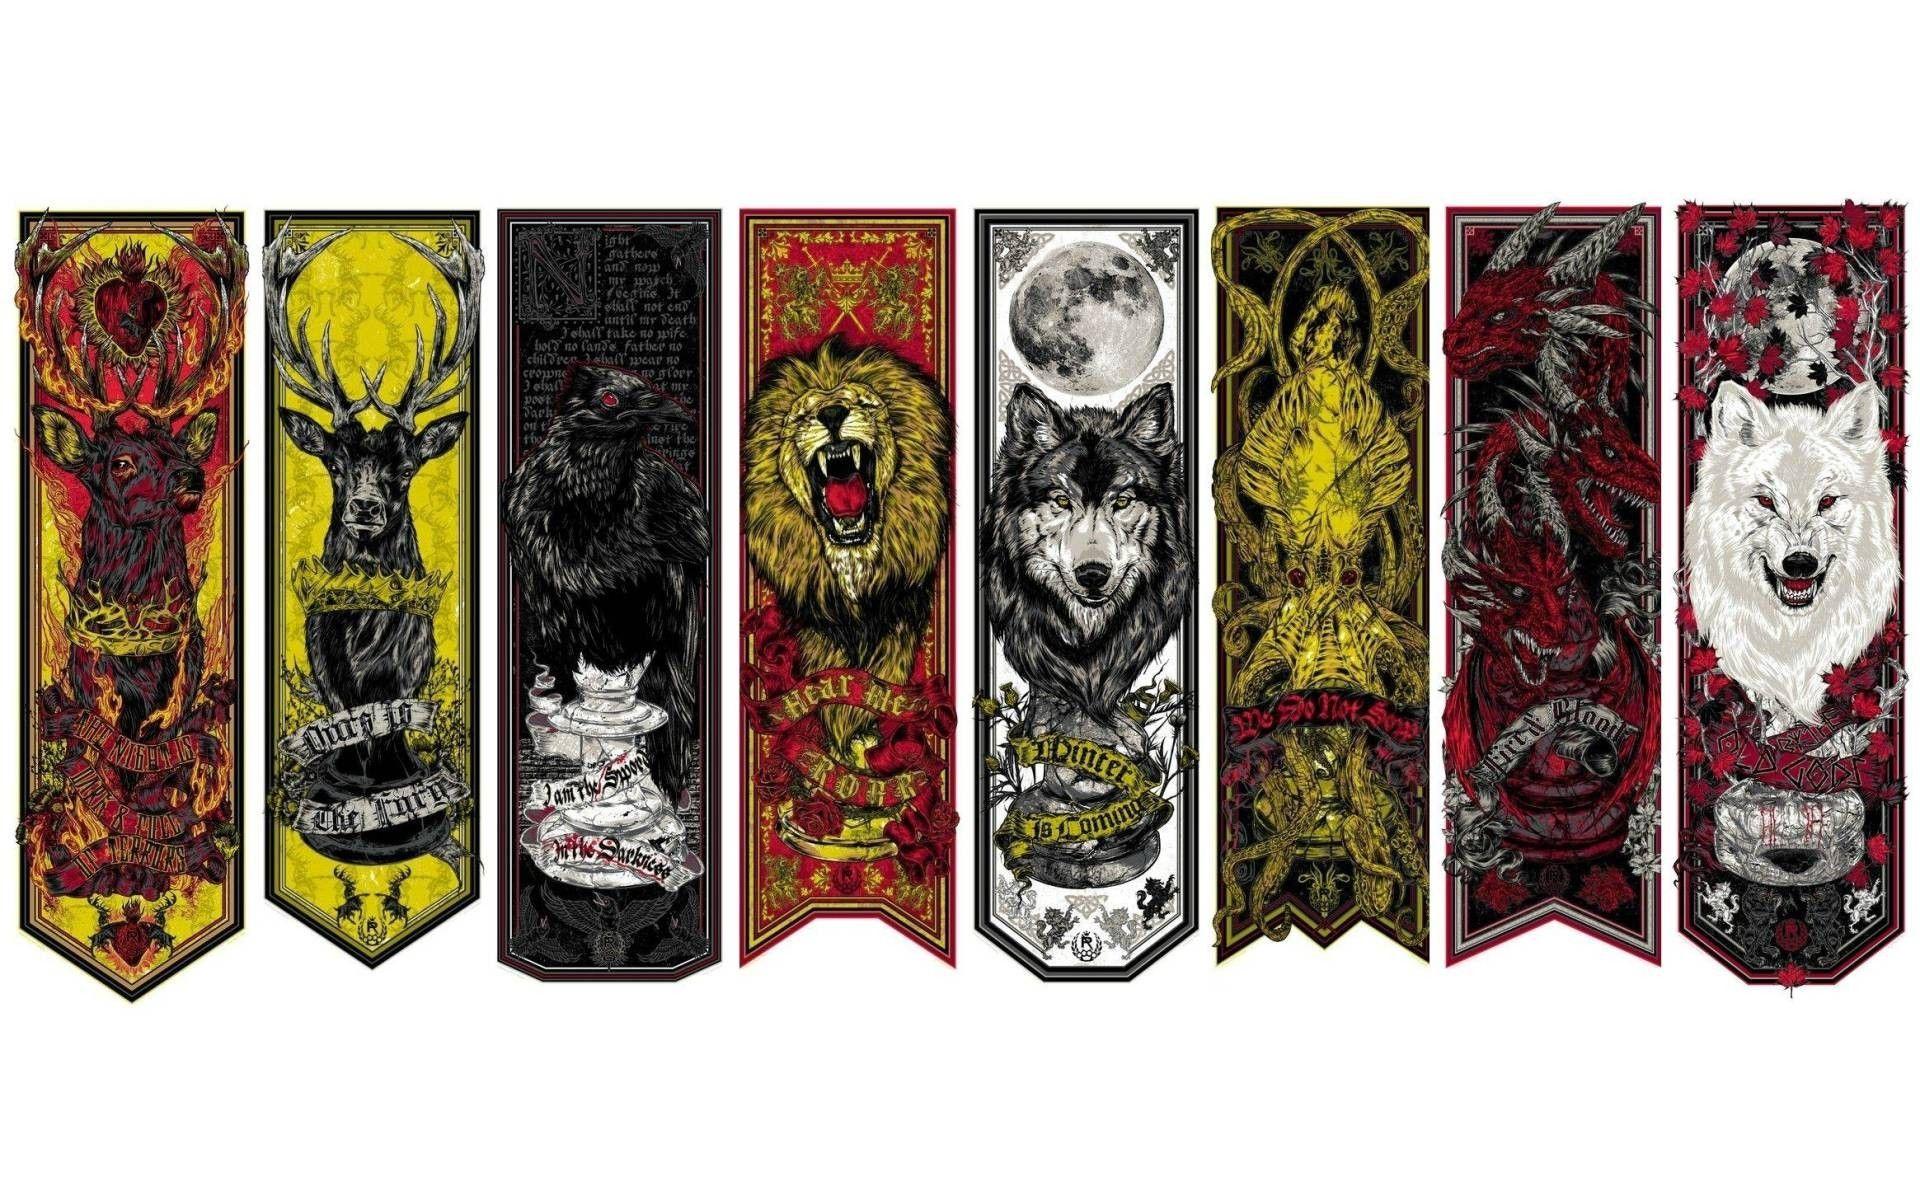 Game of thrones houses banners. Game of Thrones (Obsessed). Game